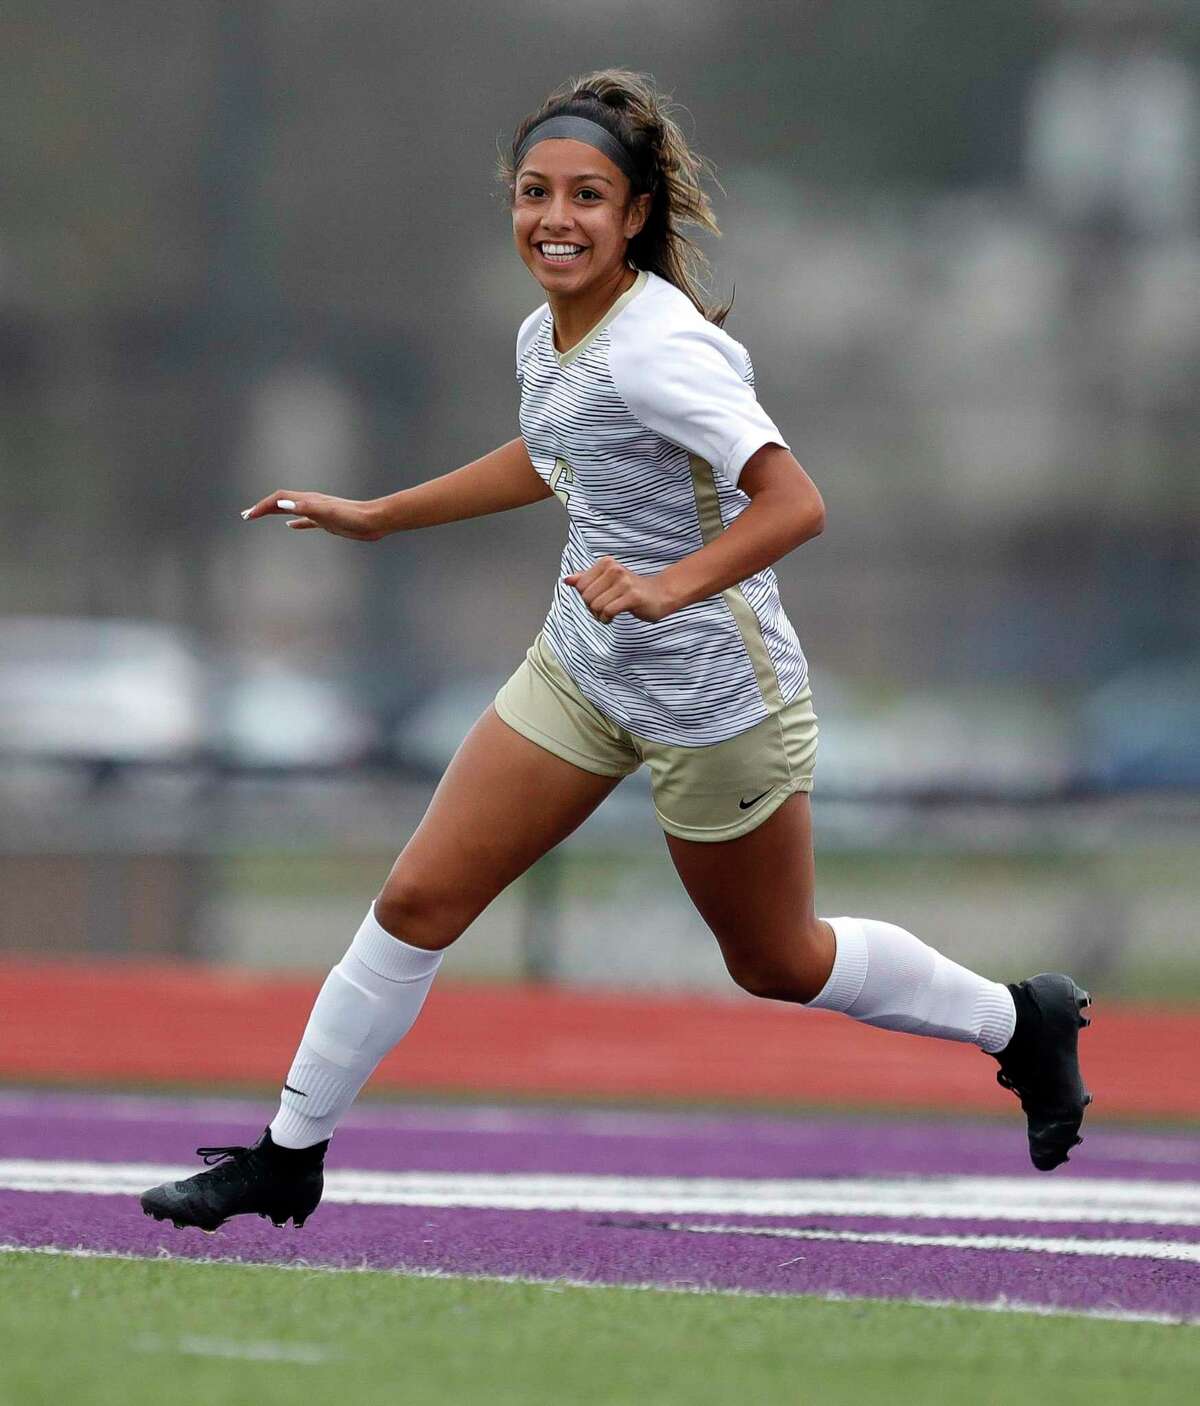 GIRLS SOCCER: Stinson takes over young Conroe team